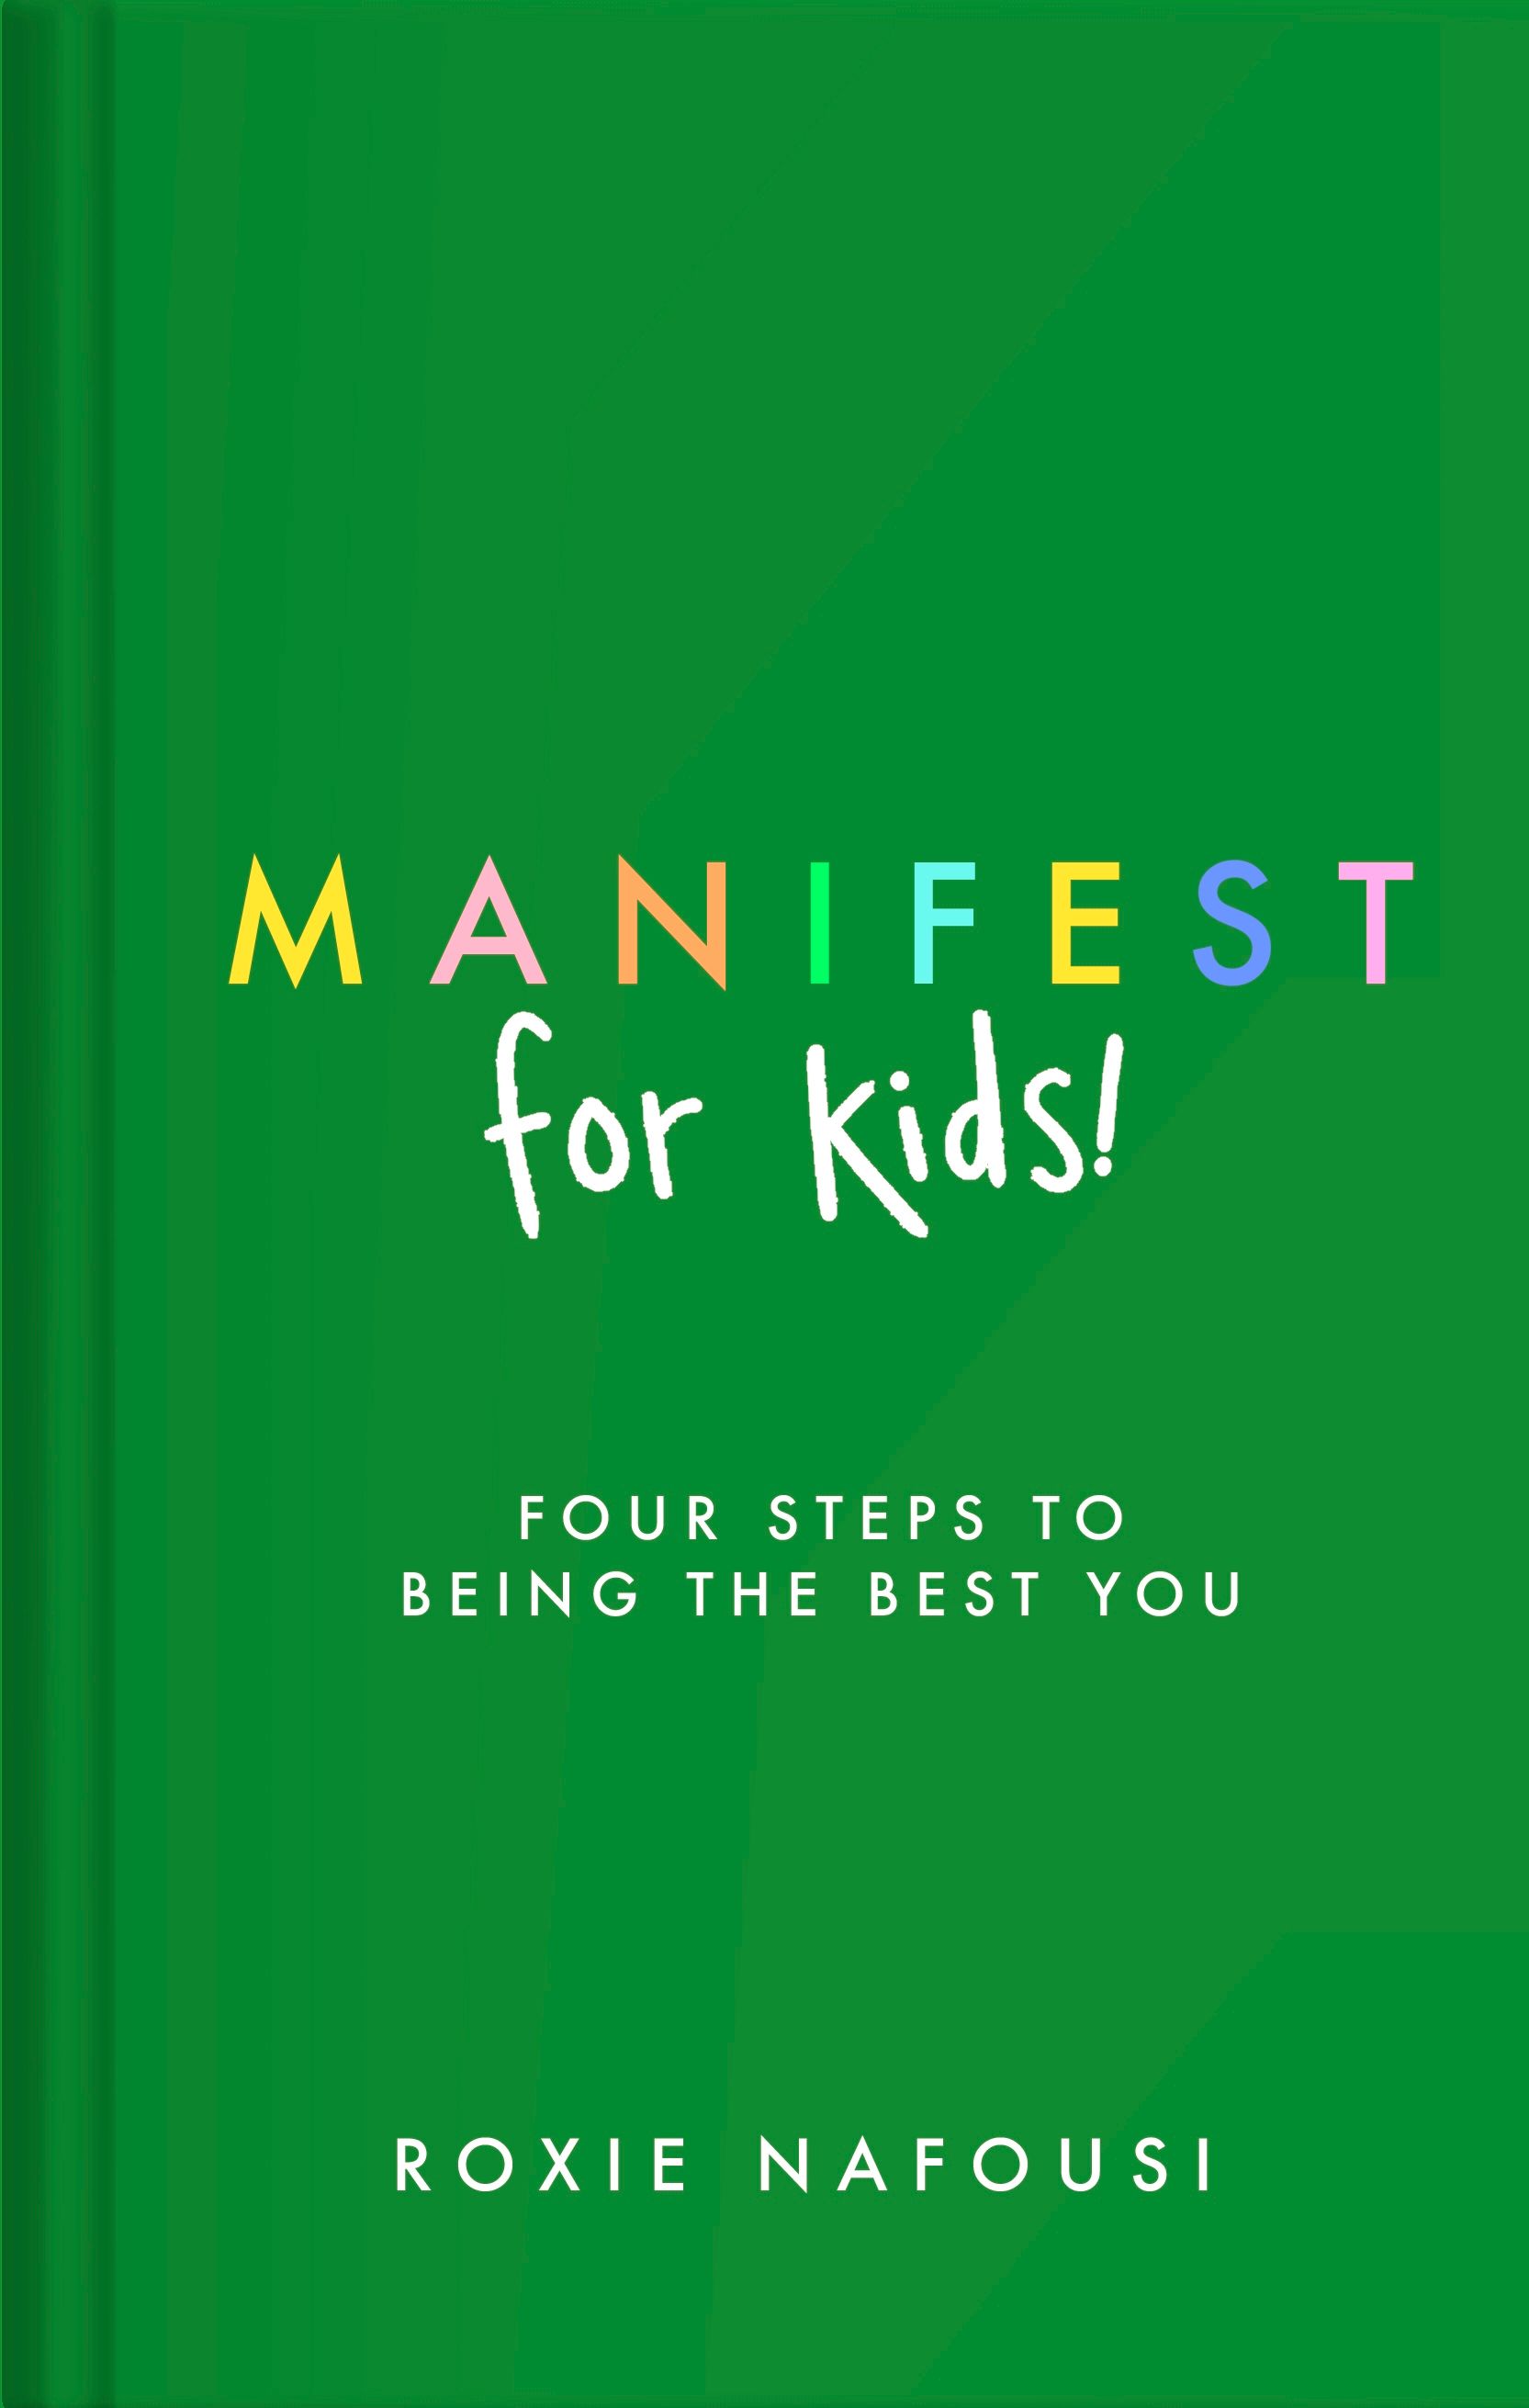 Green book cover with text "Manifest for kids! Four steps to being the best you" by Roxie Nafousi